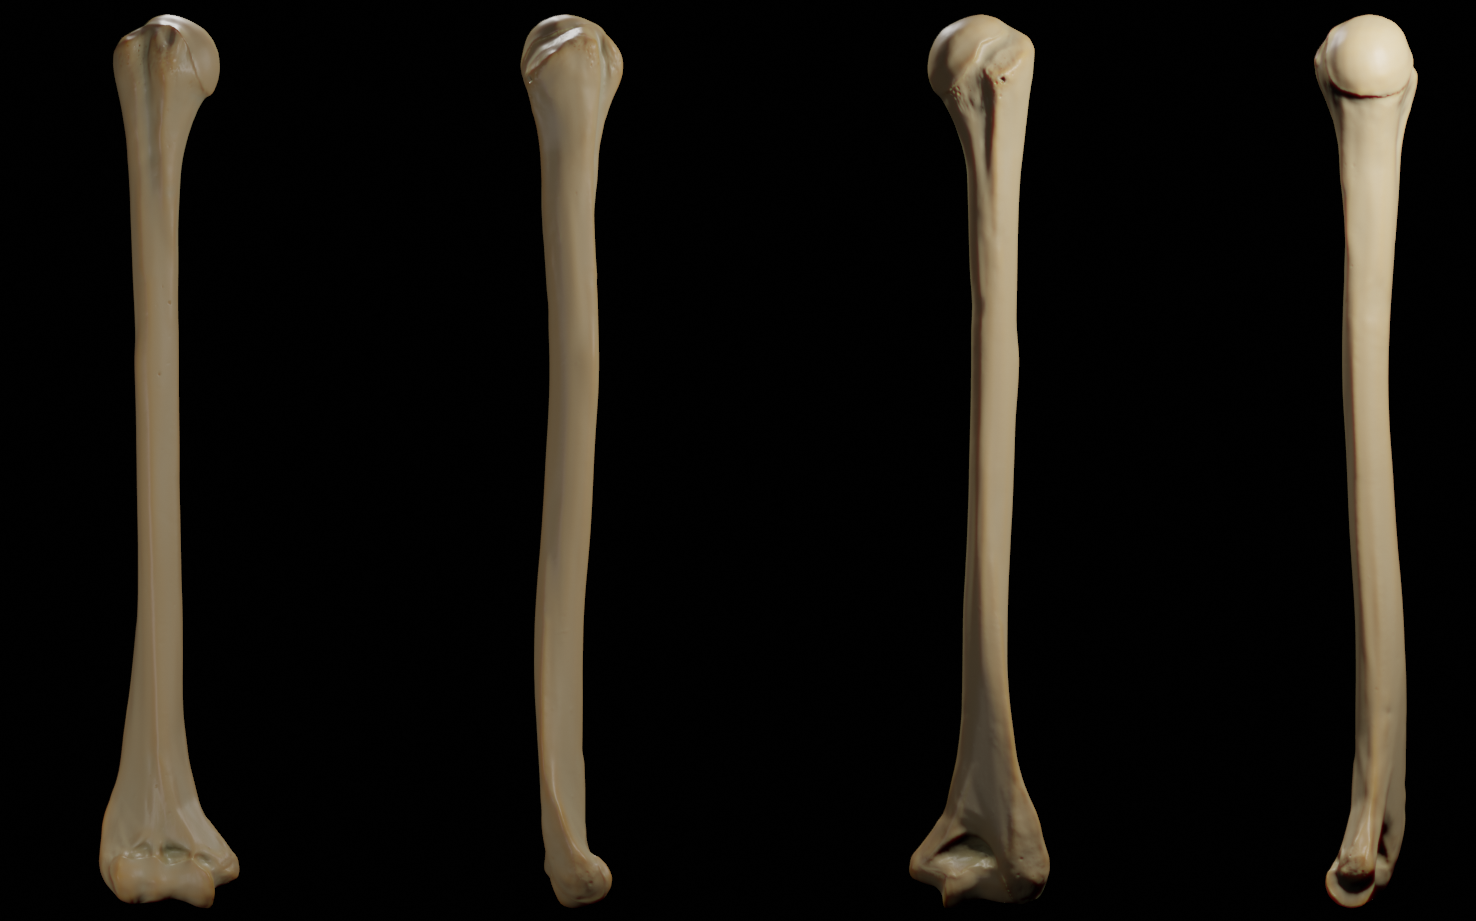 Humerus - Anterior, Posterior, Medial and lateral views